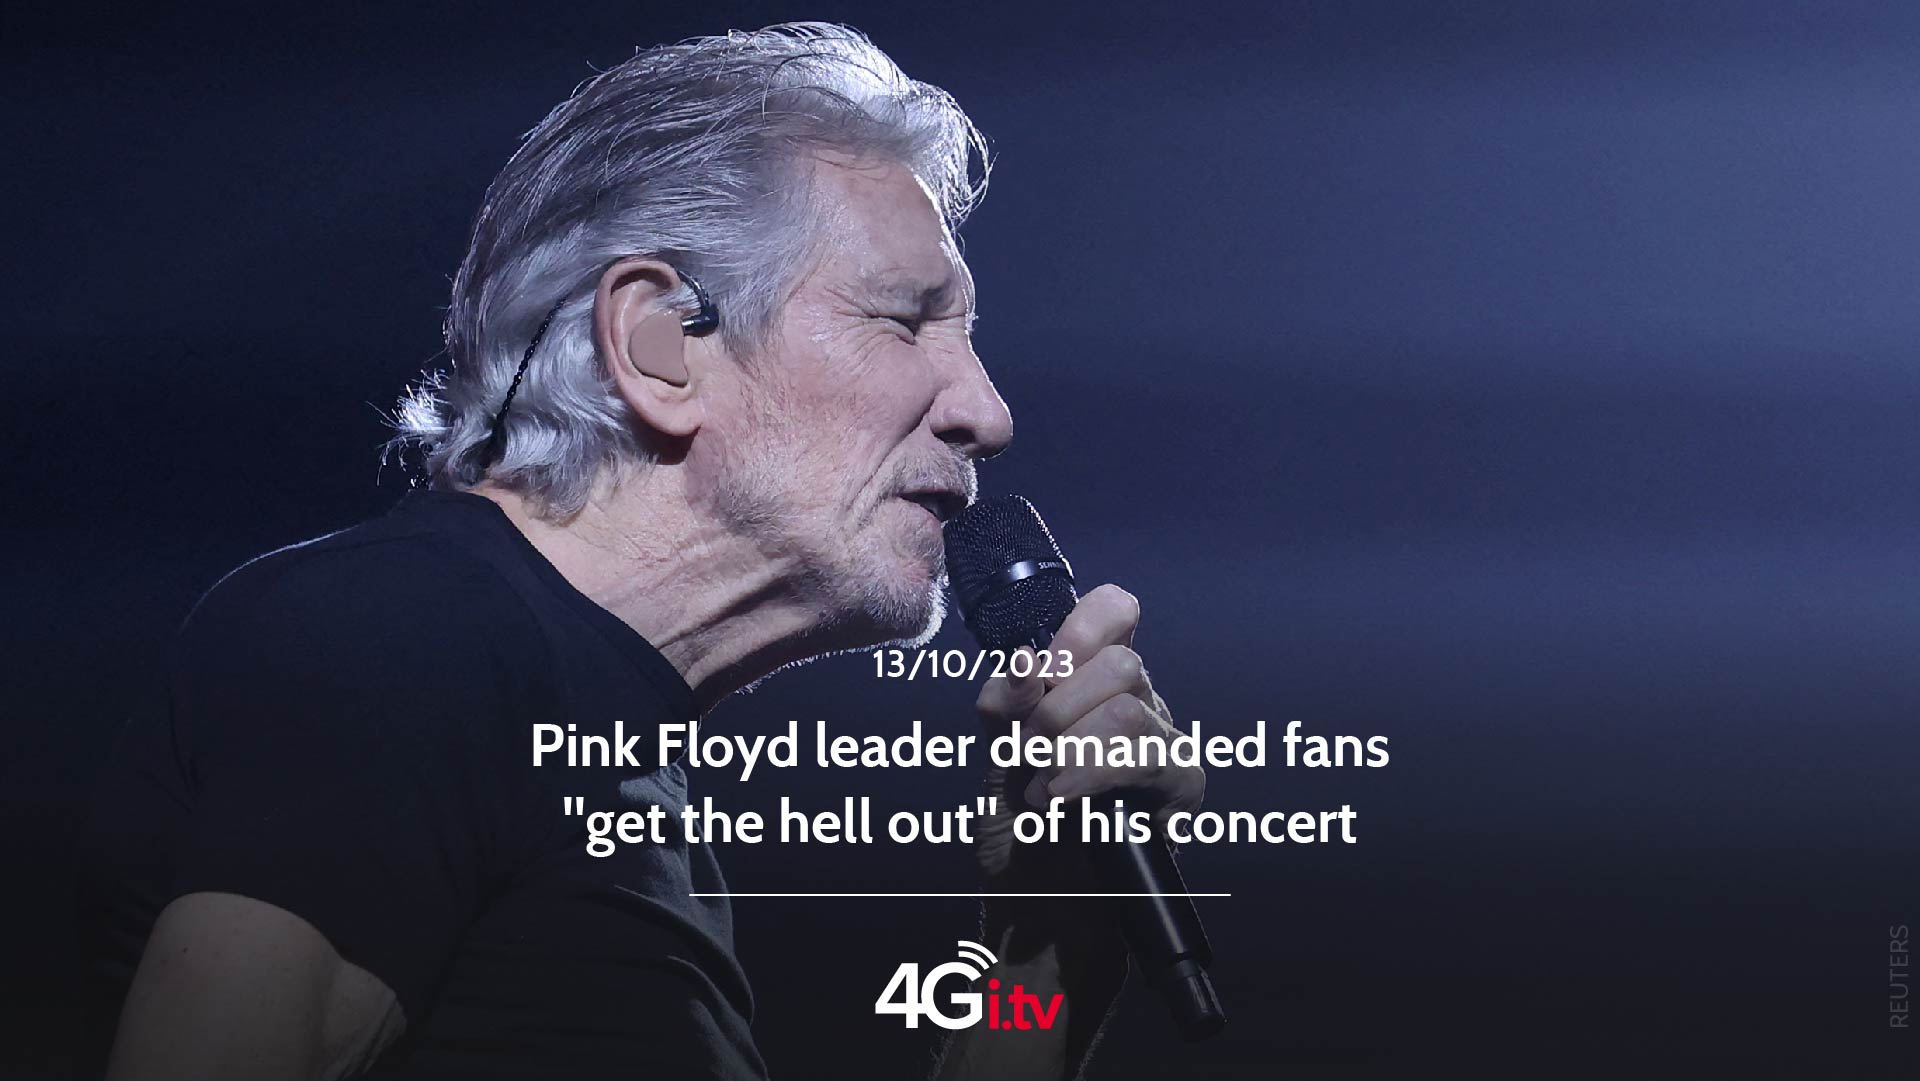 Подробнее о статье Pink Floyd leader demanded fans “get the hell out” of his concert